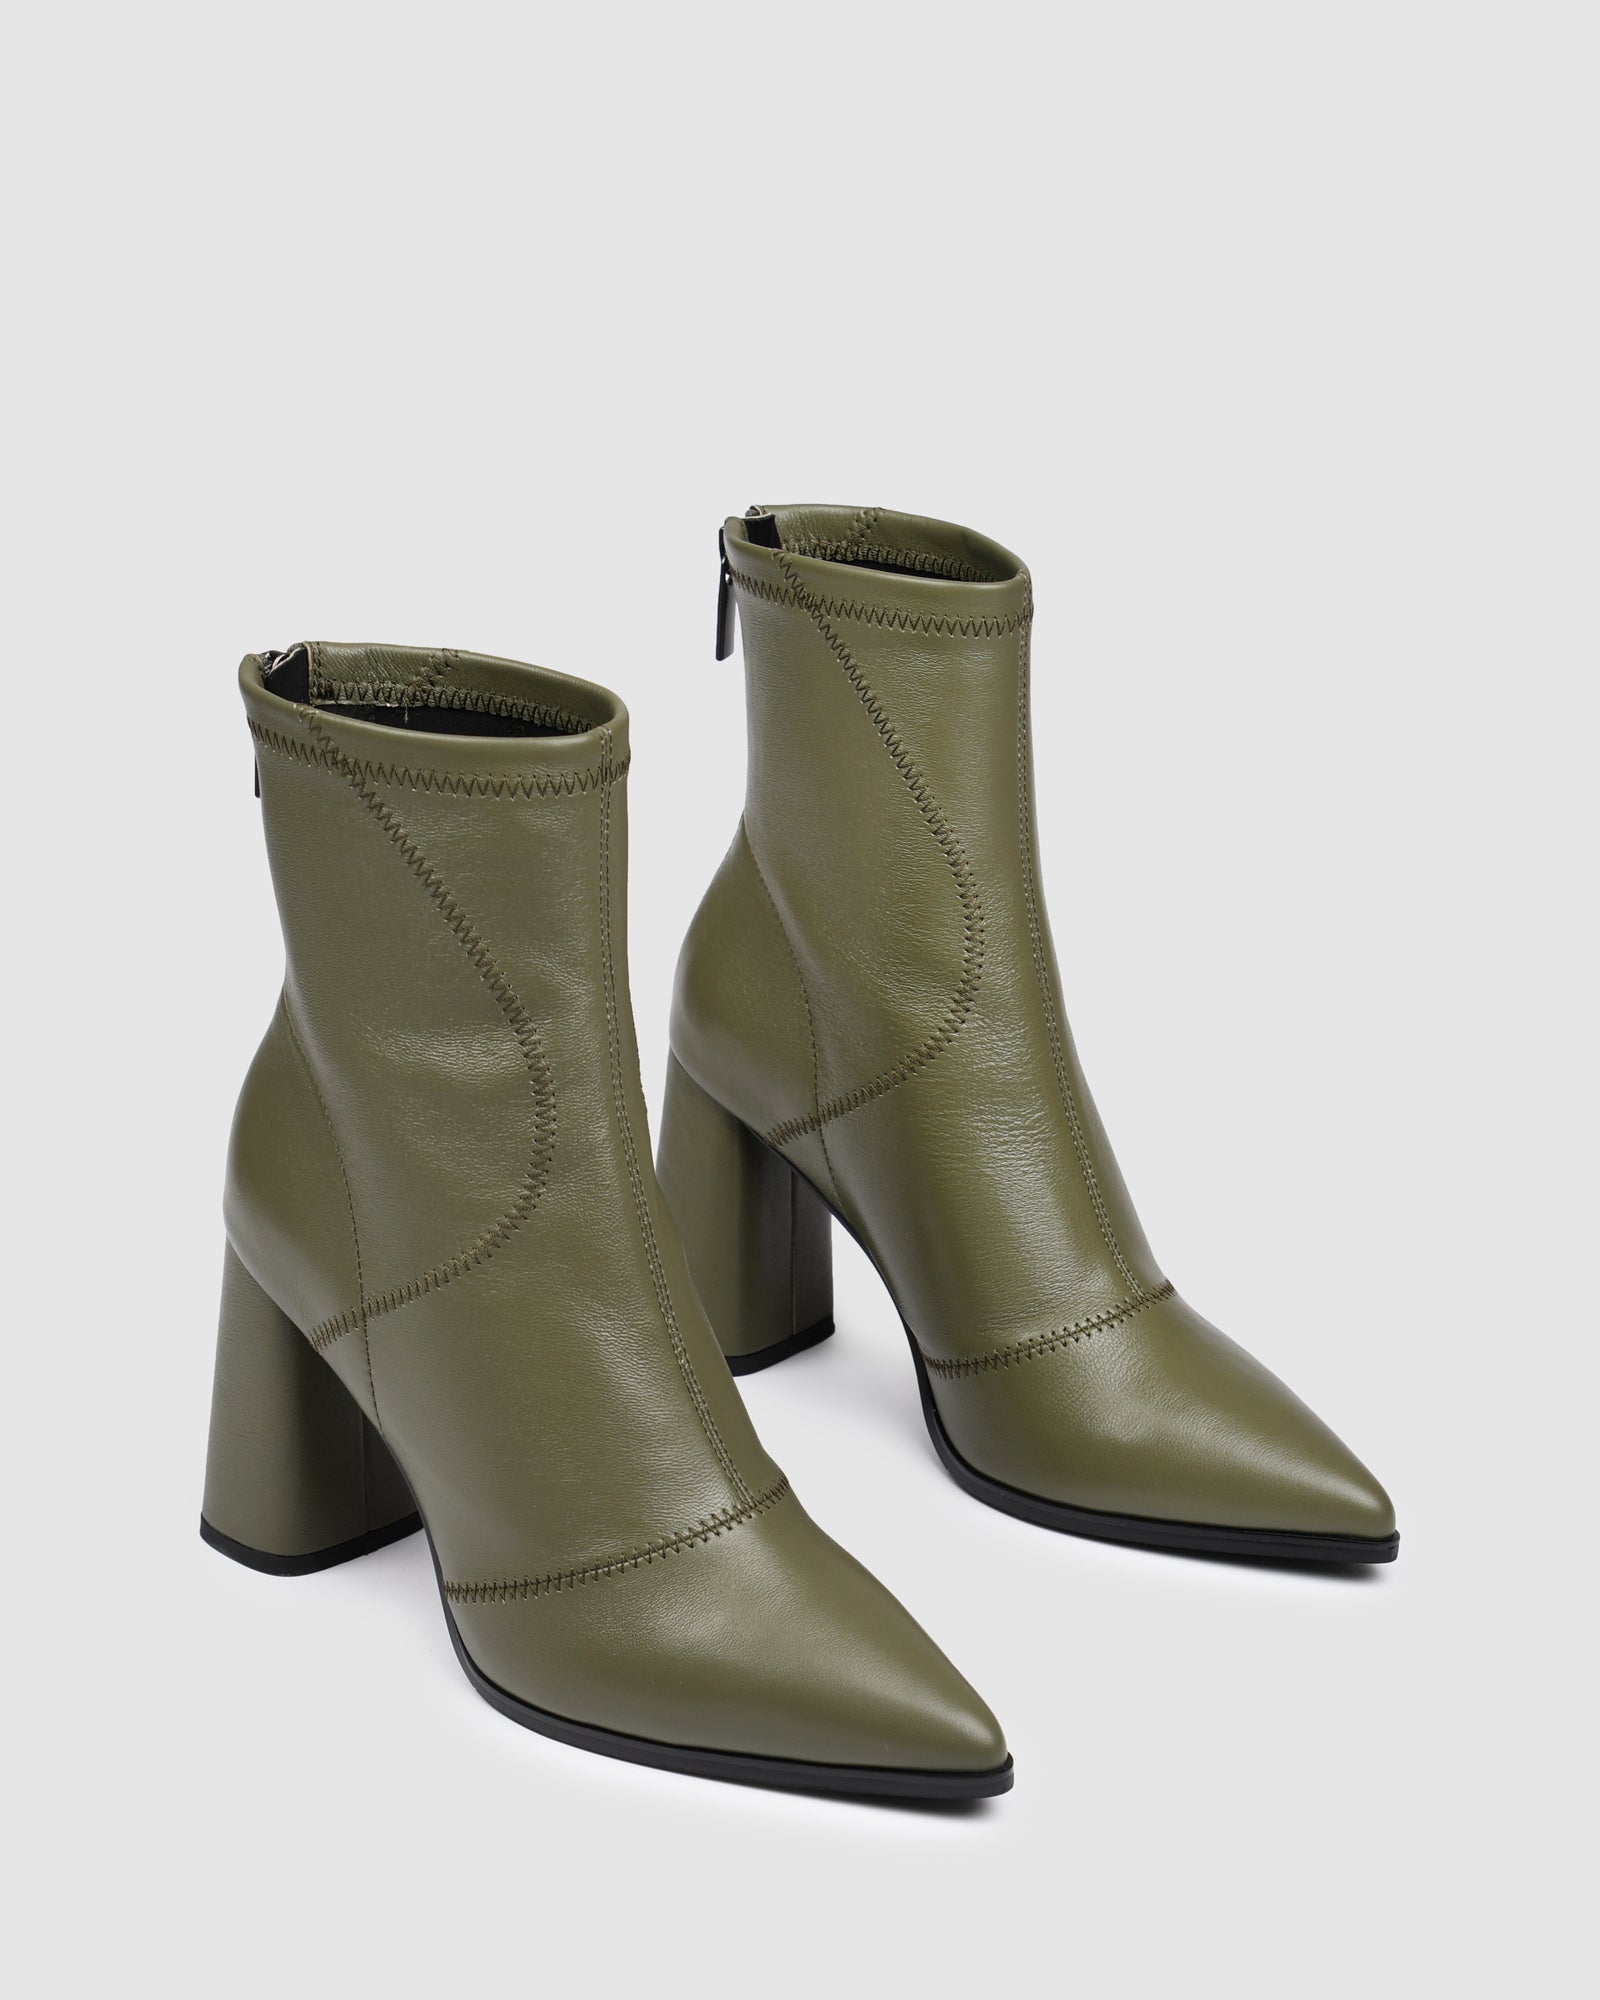 TEX HIGH ANKLE BOOTS OLIVE GREEN LEATHER - Jo Mercer